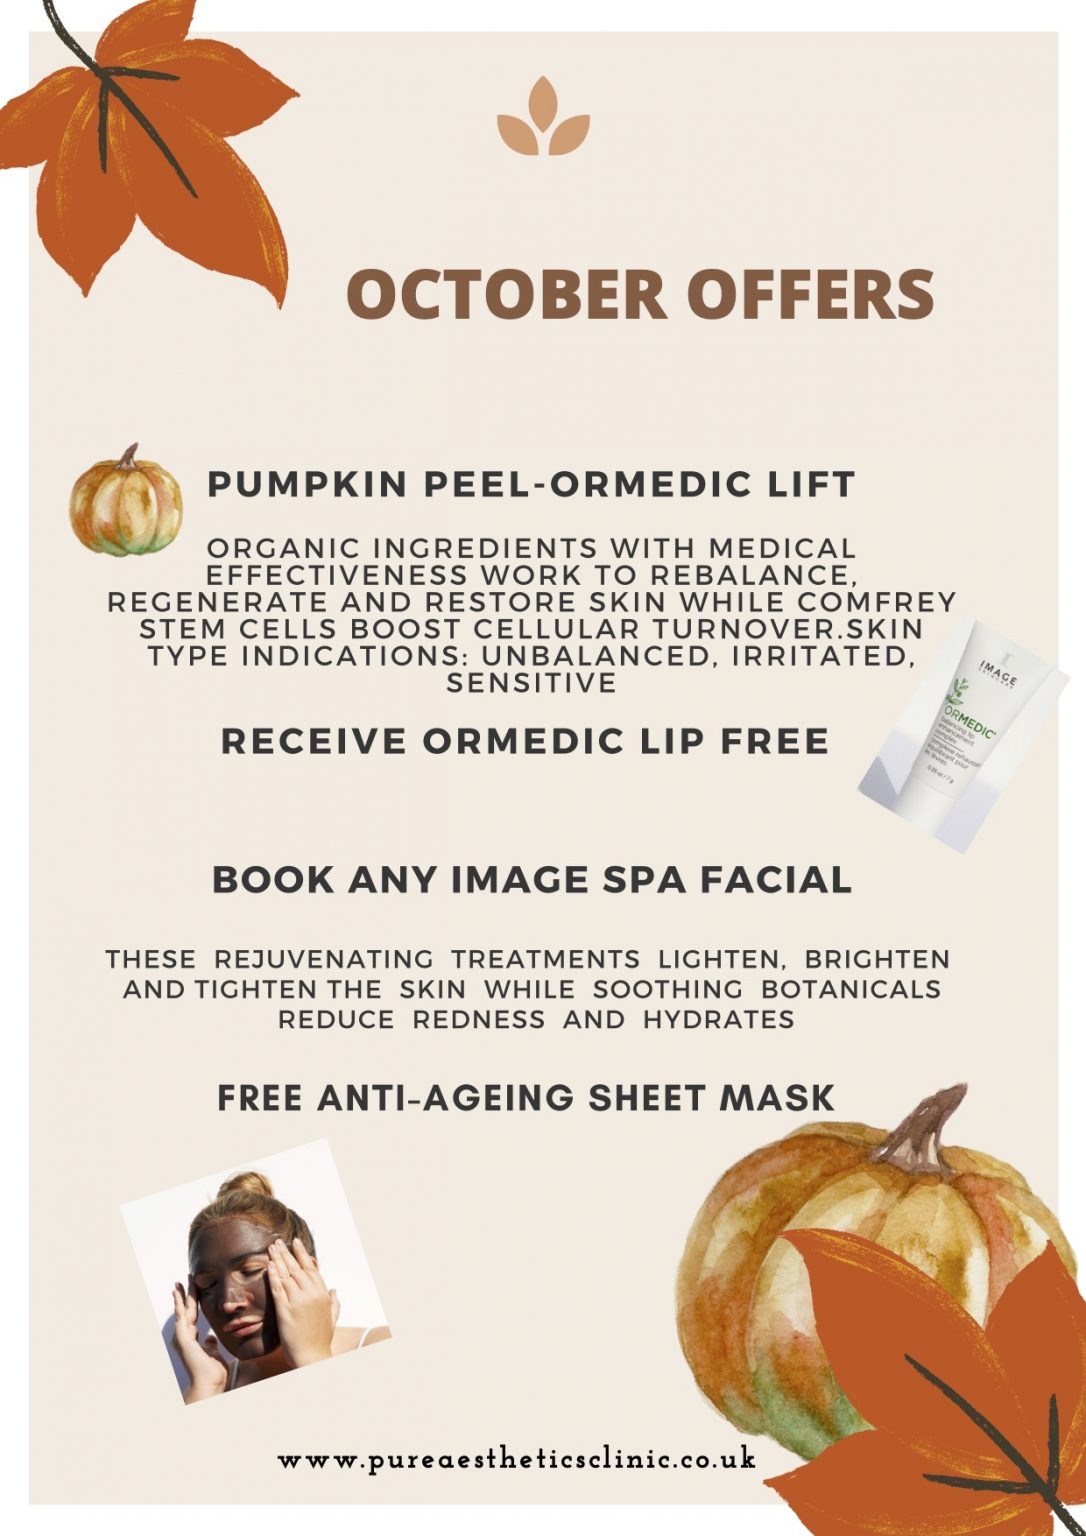 OCTOBER OFFERS